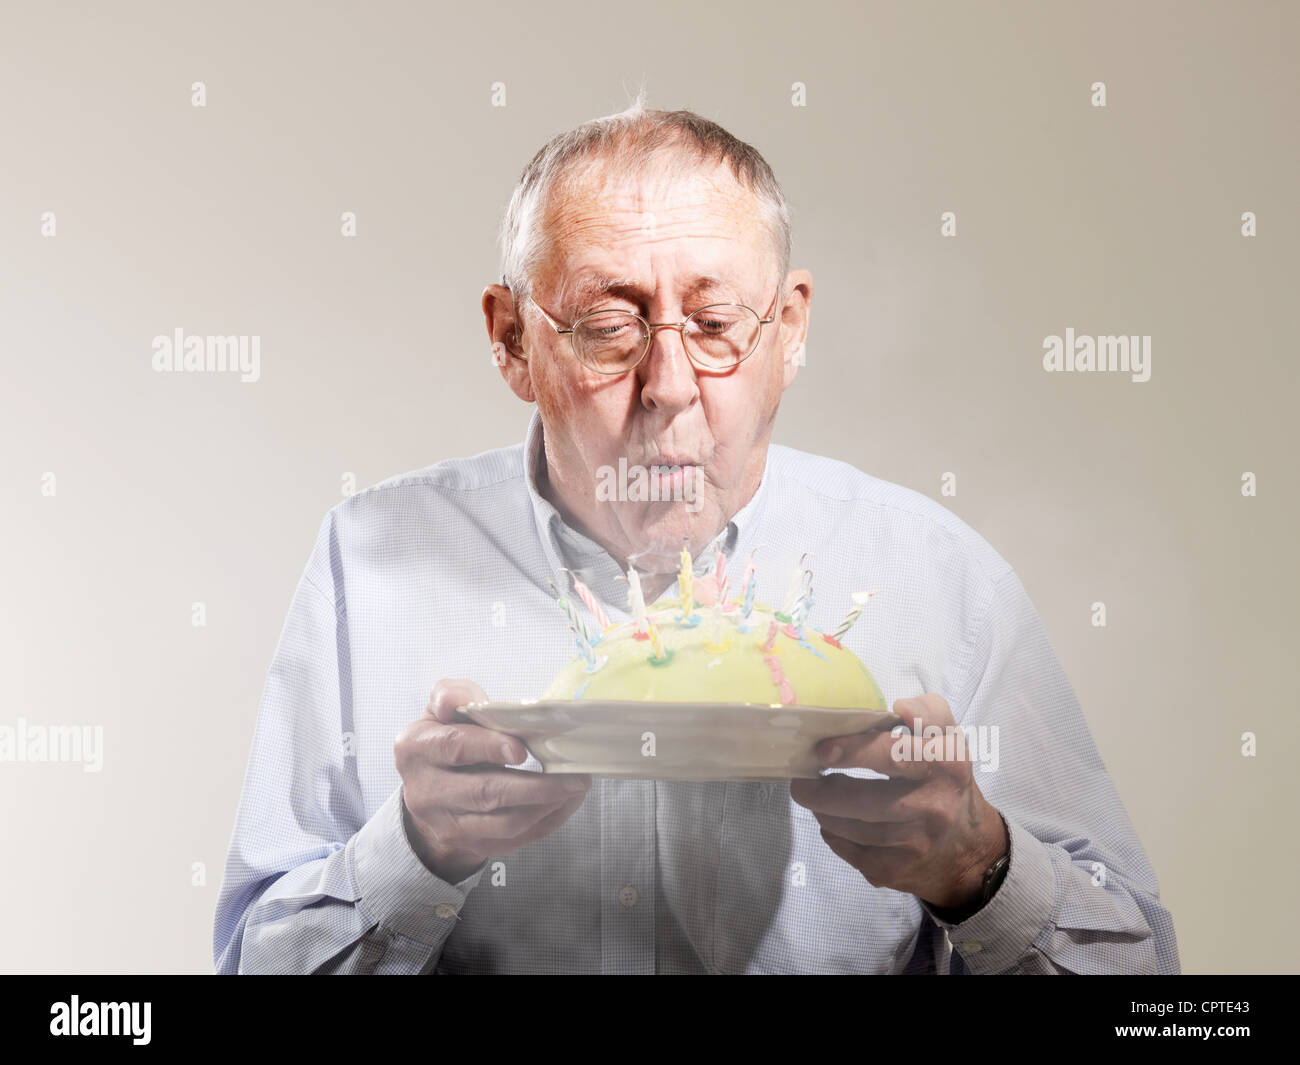 Senior man blowing out candles on brithday cake against white background Stock Photo